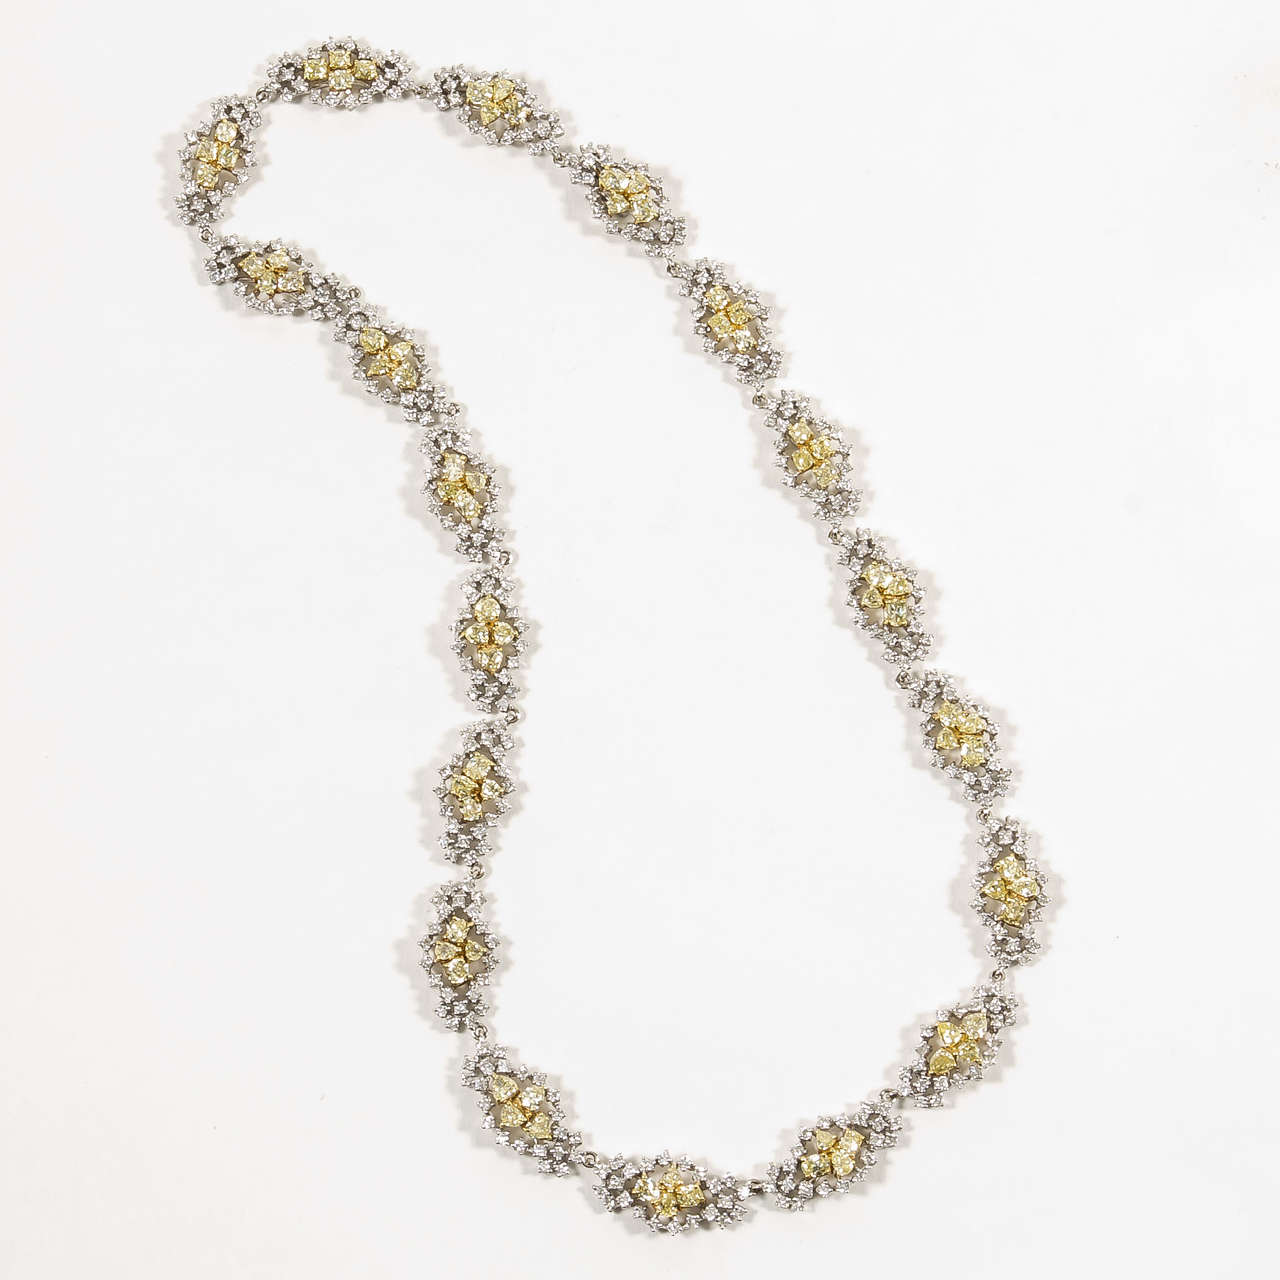 An elegant and timeless design.

5.92 carats of round brilliant white diamonds, 9.42 carats of multishape yellow diamonds set in 18k white and yellow gold.

1.85 carats of round brilliant white diamonds, 3.01 carats of multishape yellow diamonds